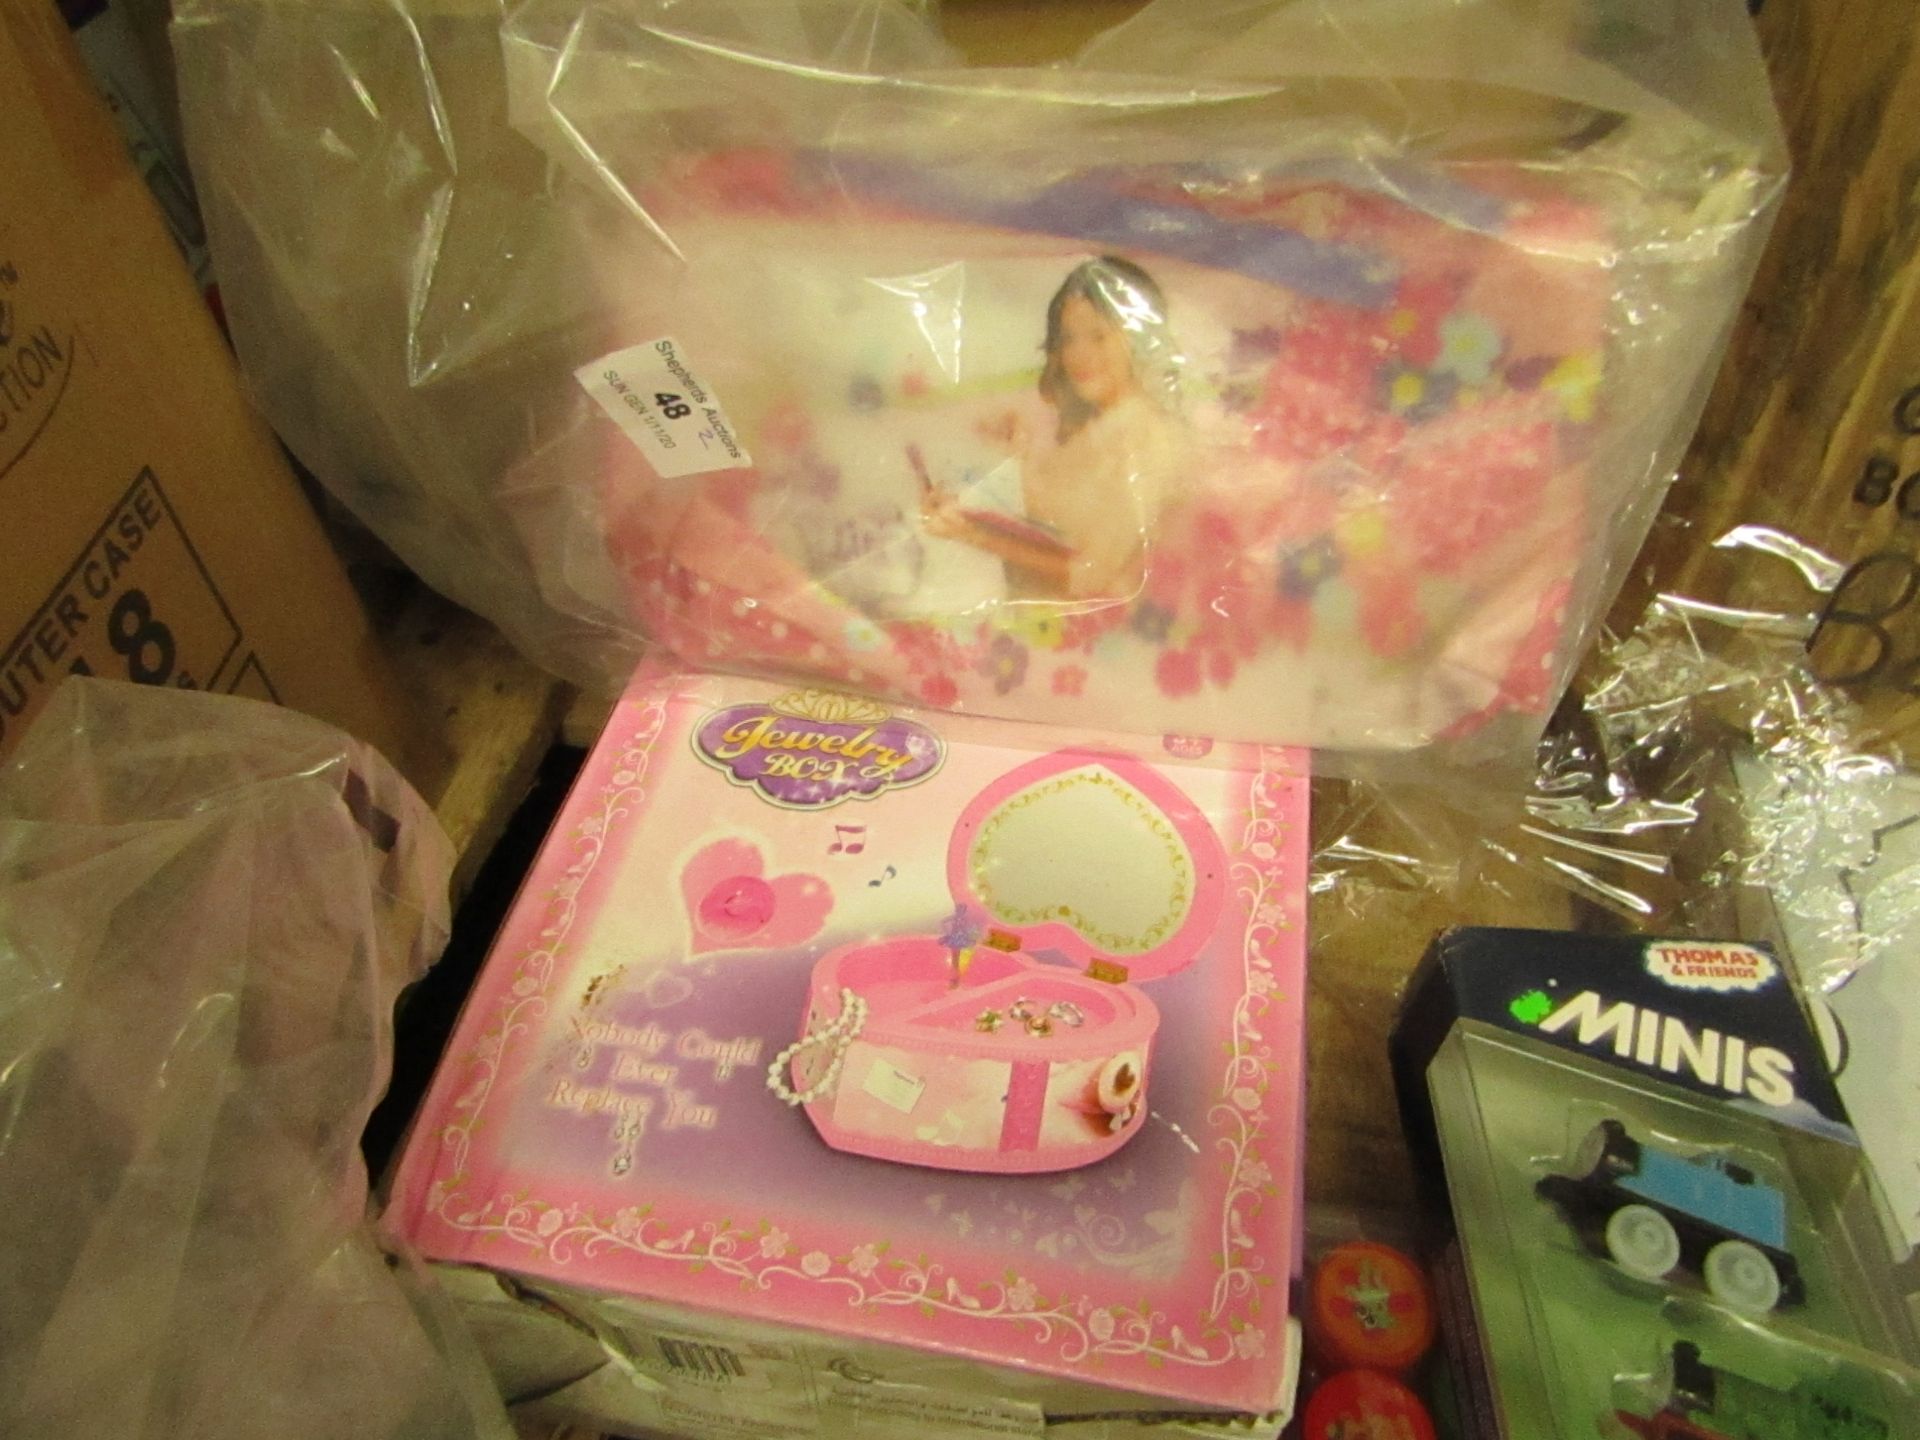 2 Items Being a Girls Jewelry Box & a Violetta Make up Bag. Both unused